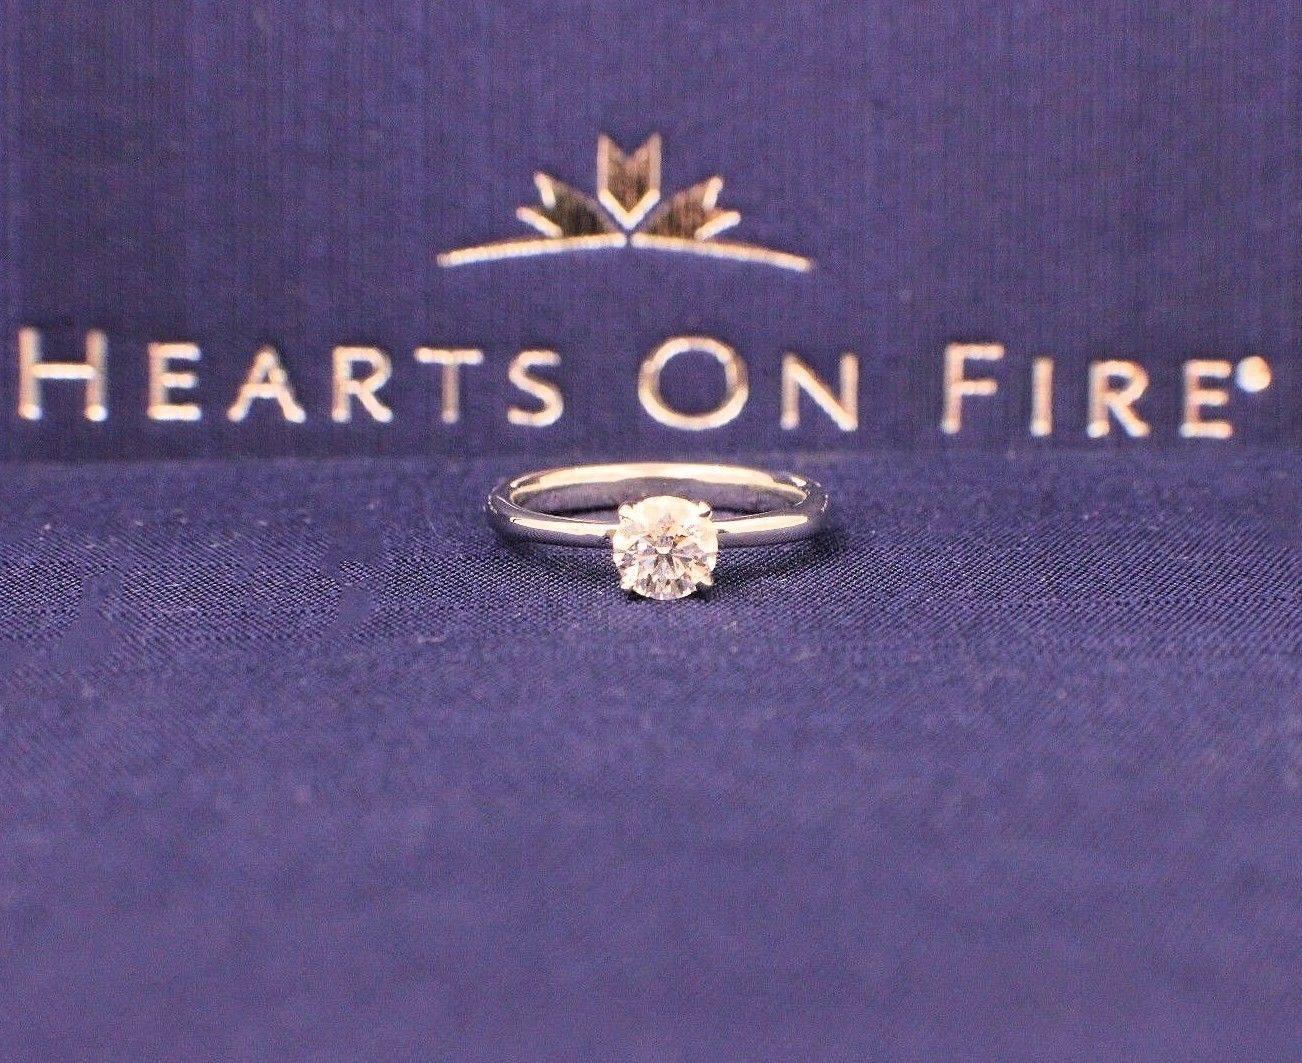 Brand:  HEARTS ON FIRE
Stye:  4-Prong Solitaire Engagement Ring
Serial Number: AGS 0003059009
Metal:  White Gold
Metal Purity:  750
Size: 6.75
Total Carat Weight:  0.667 CTS
Diamond Shape:  Round Brilliant Diamond
Diamond Color & Clarity:  H-IF